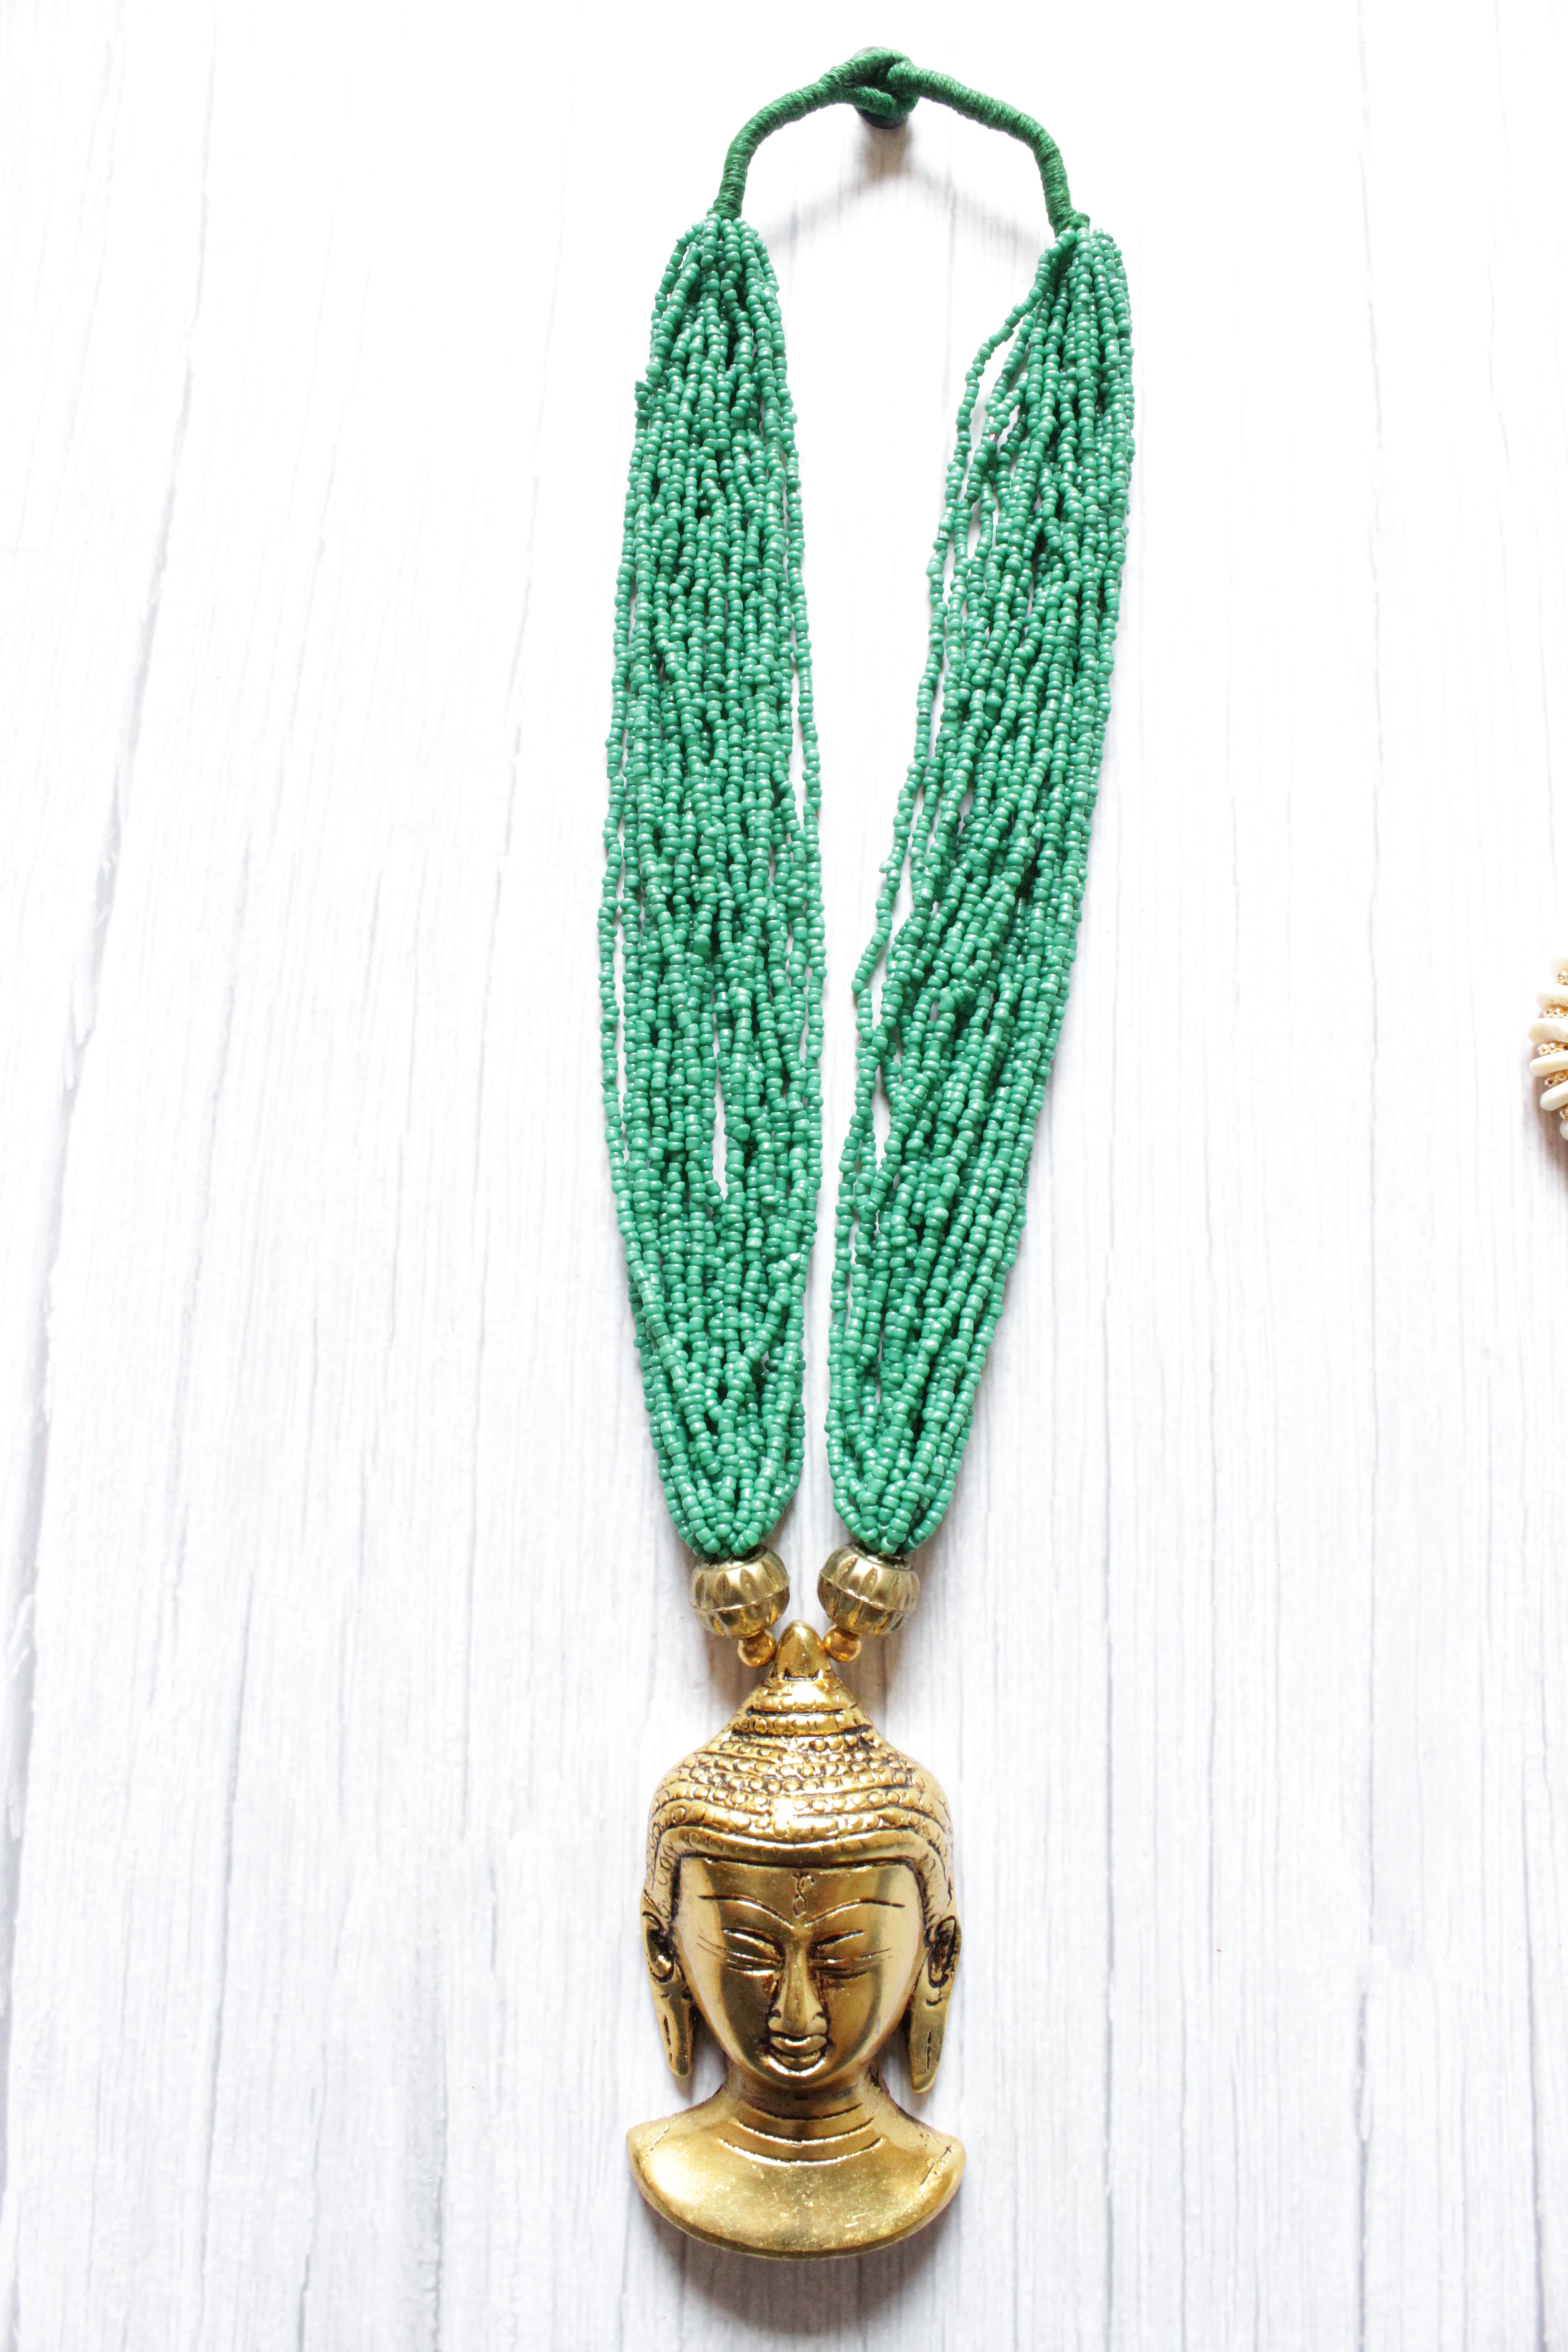 Green Beads Handcrafted Long Buddha Pendant Necklace